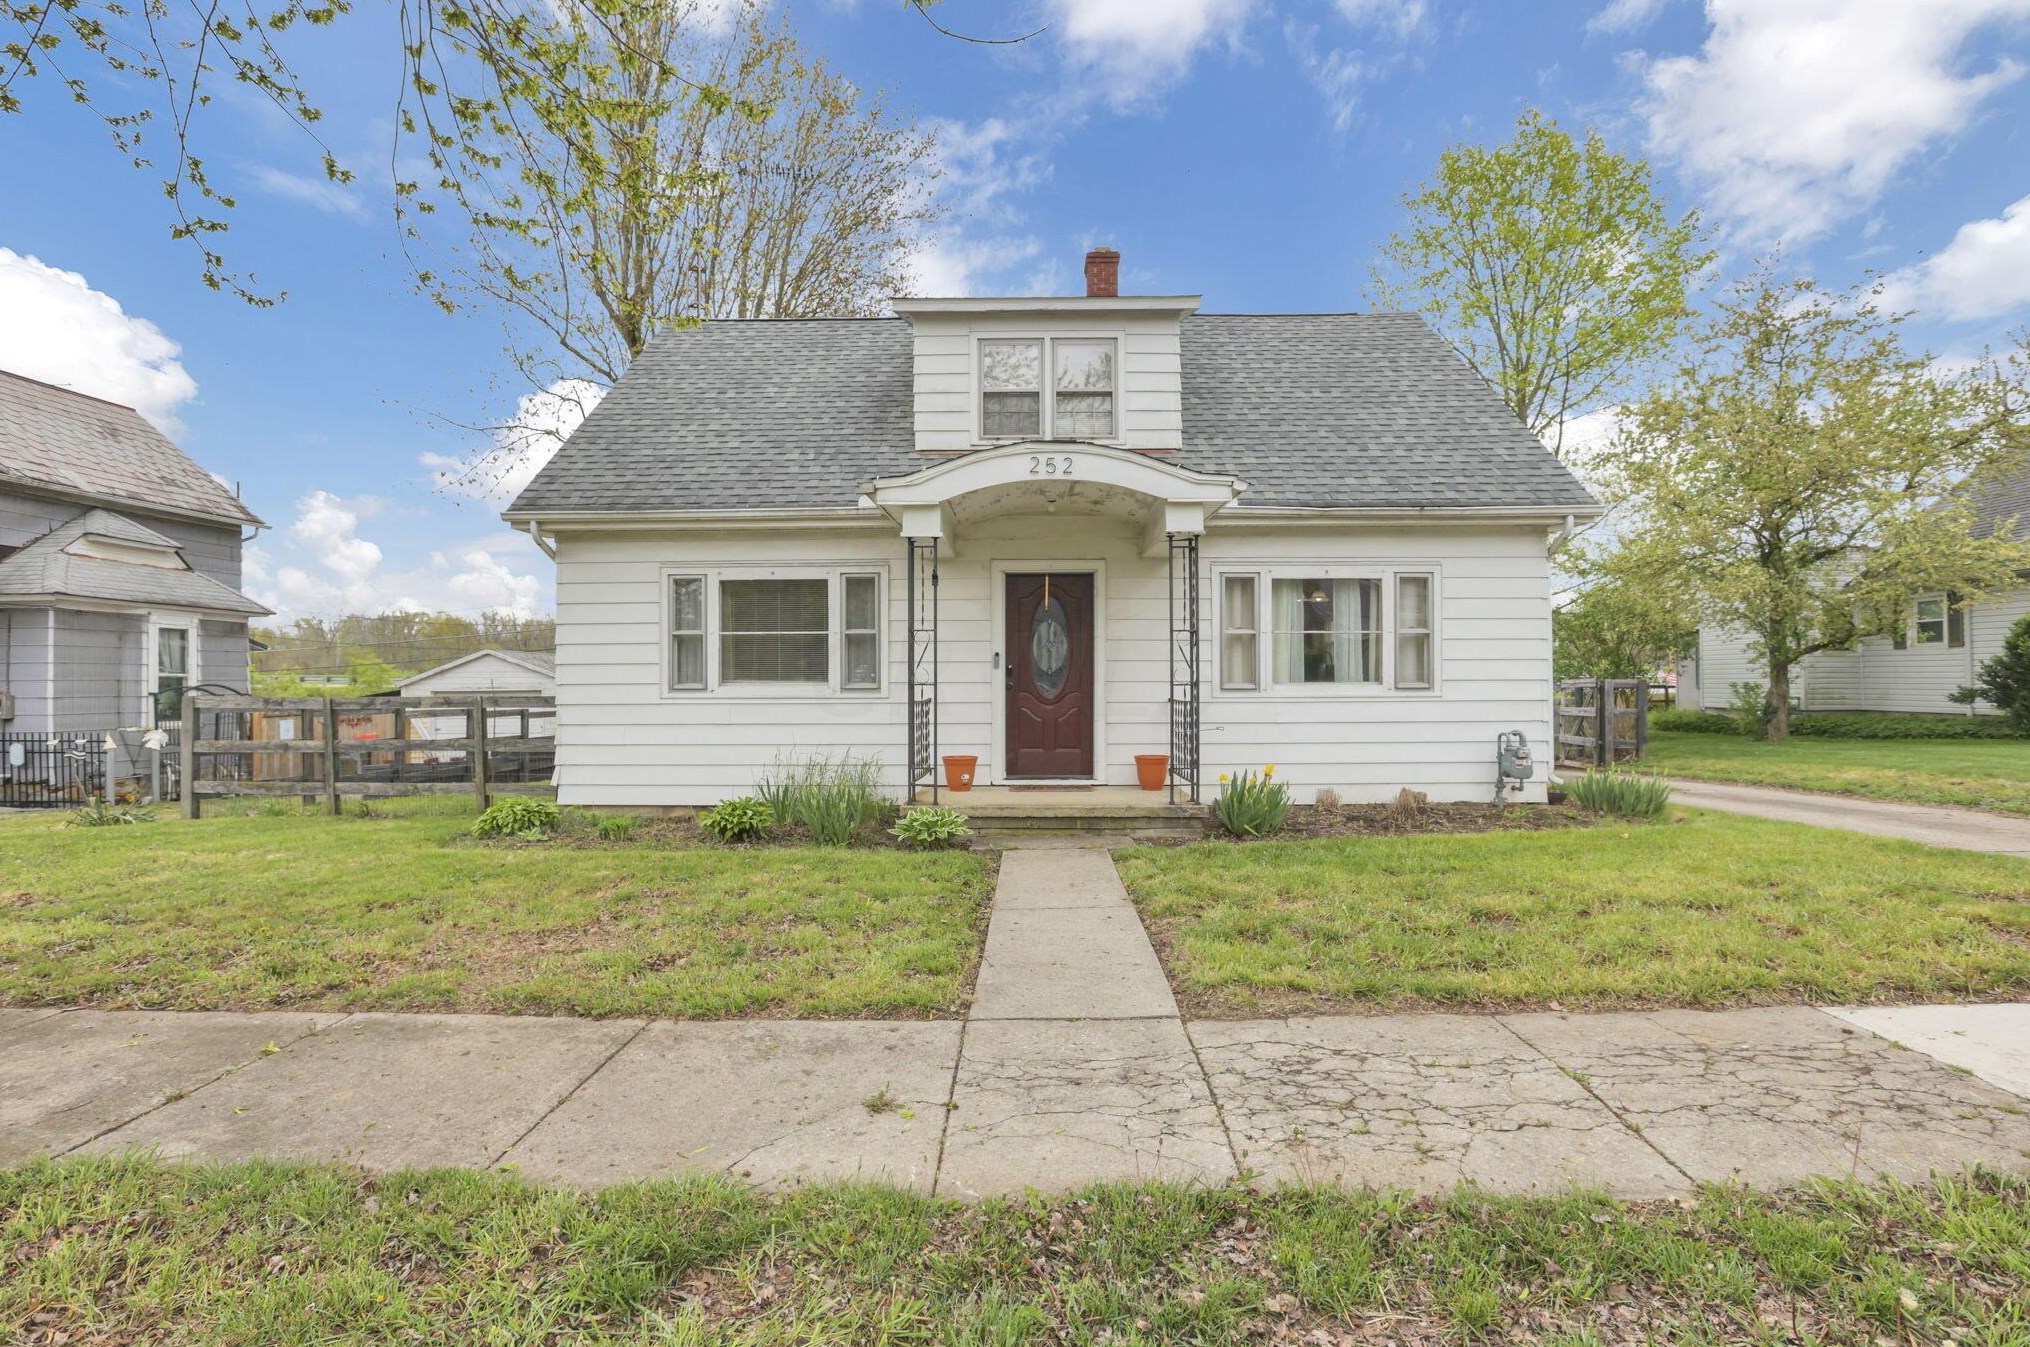 252 S Marion St, Waldo, OH 43356